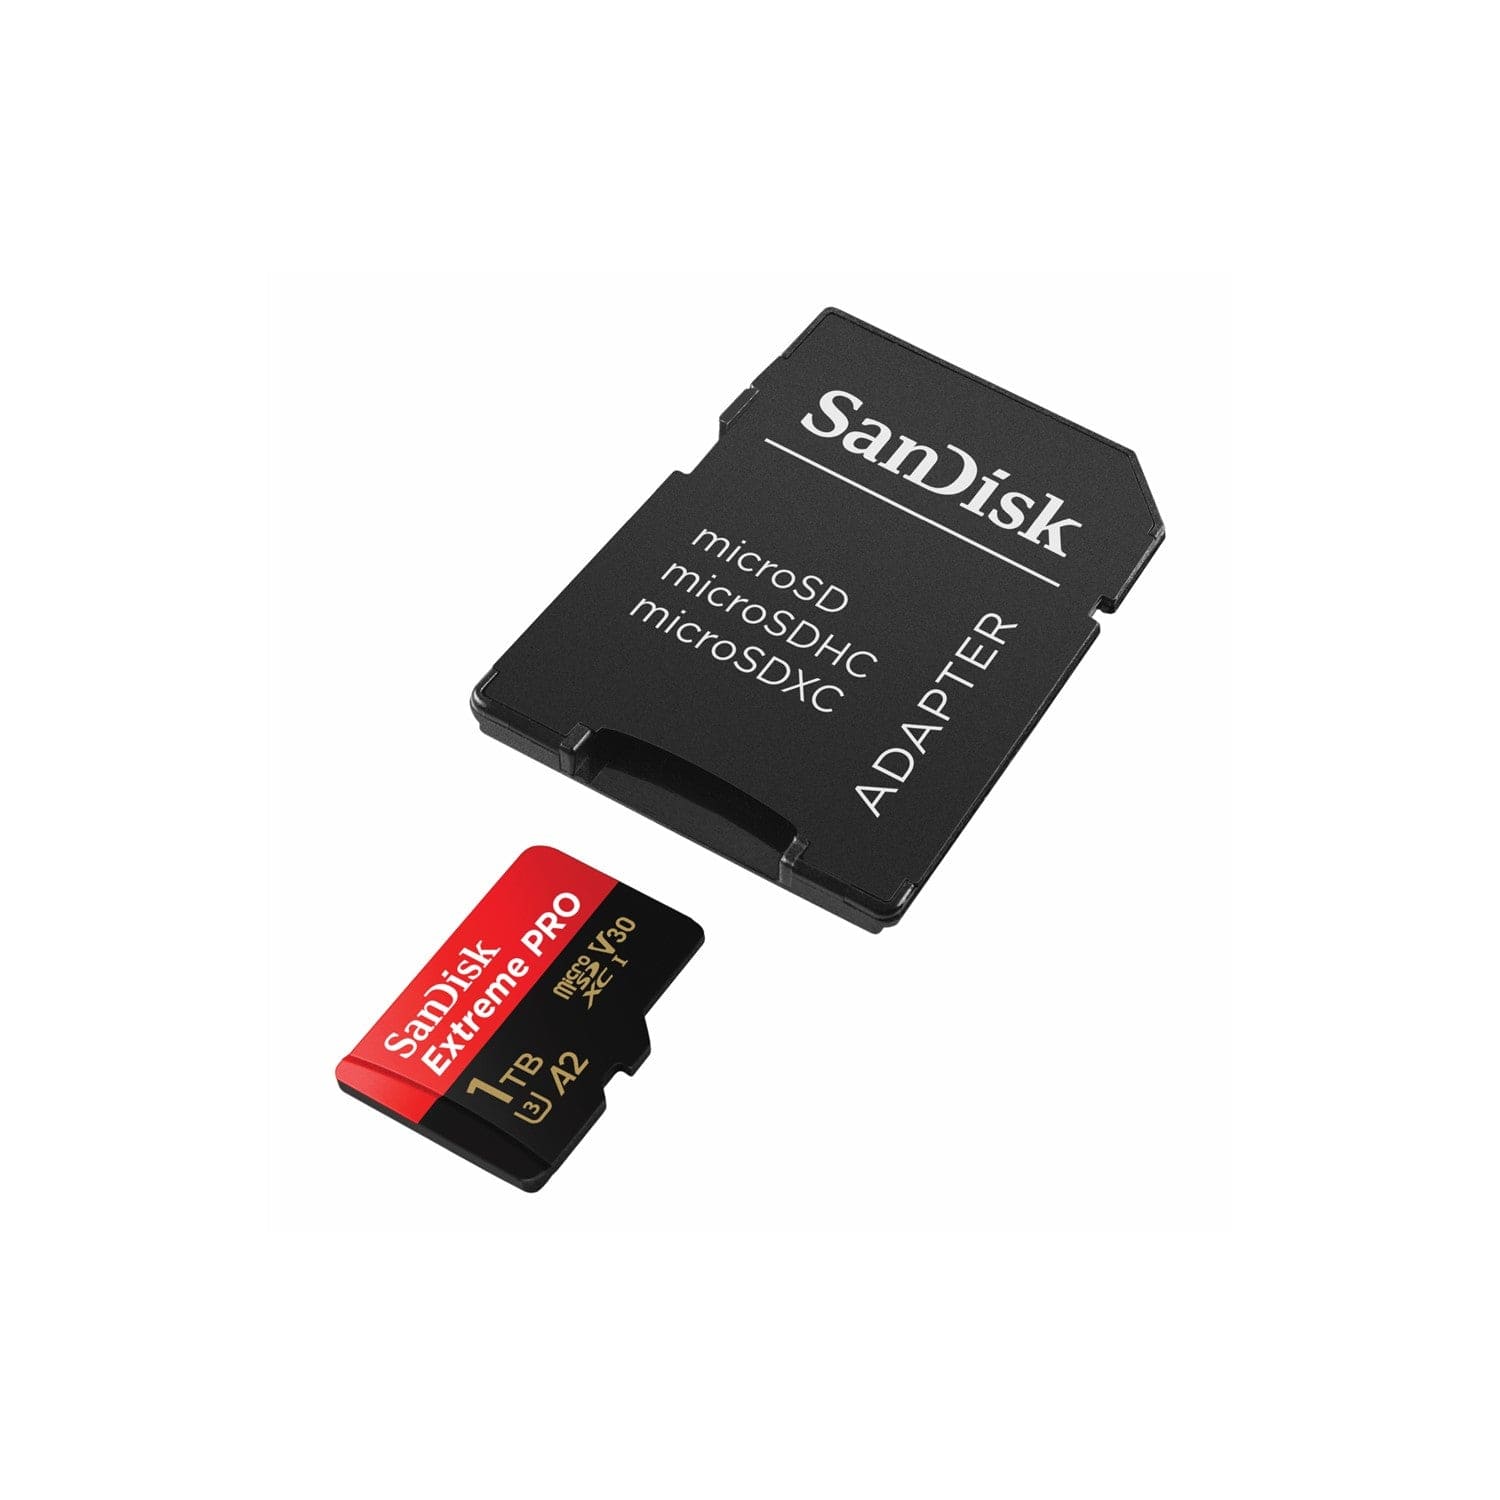 Sandisk Extreme Pro Micro SDXC Memory Card with Adapter